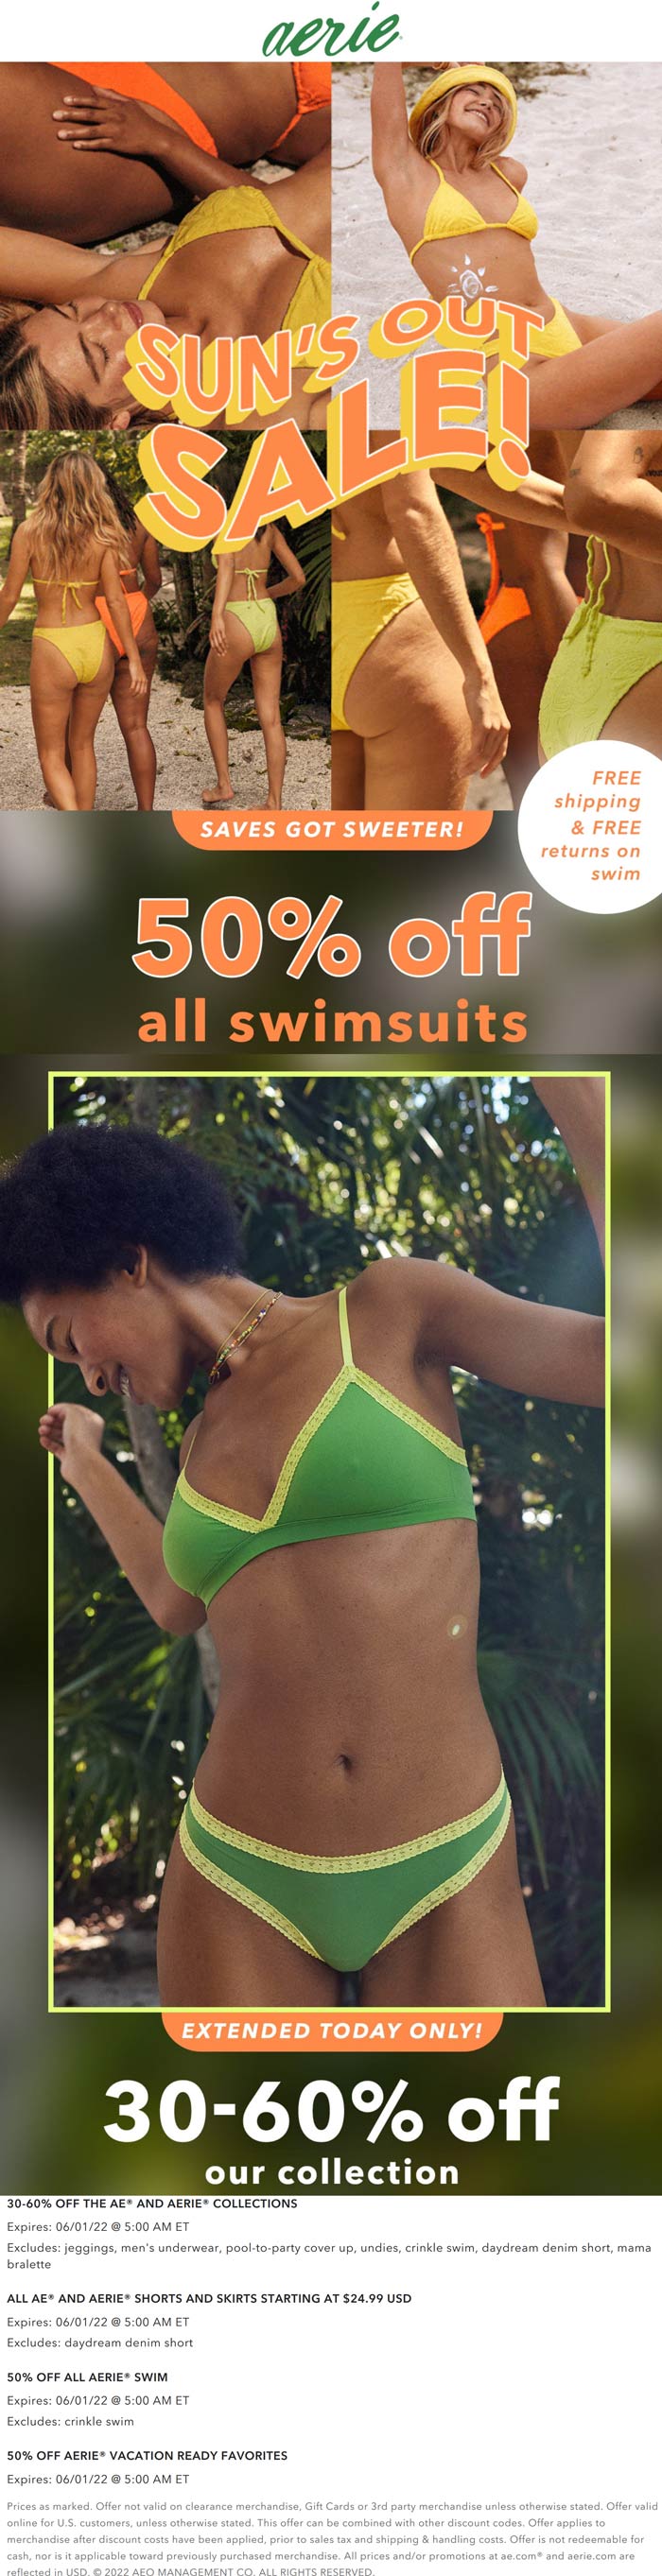 Aerie stores Coupon  50% off all swimsuits & 30-60% off lhe collection today at Aerie #aerie 